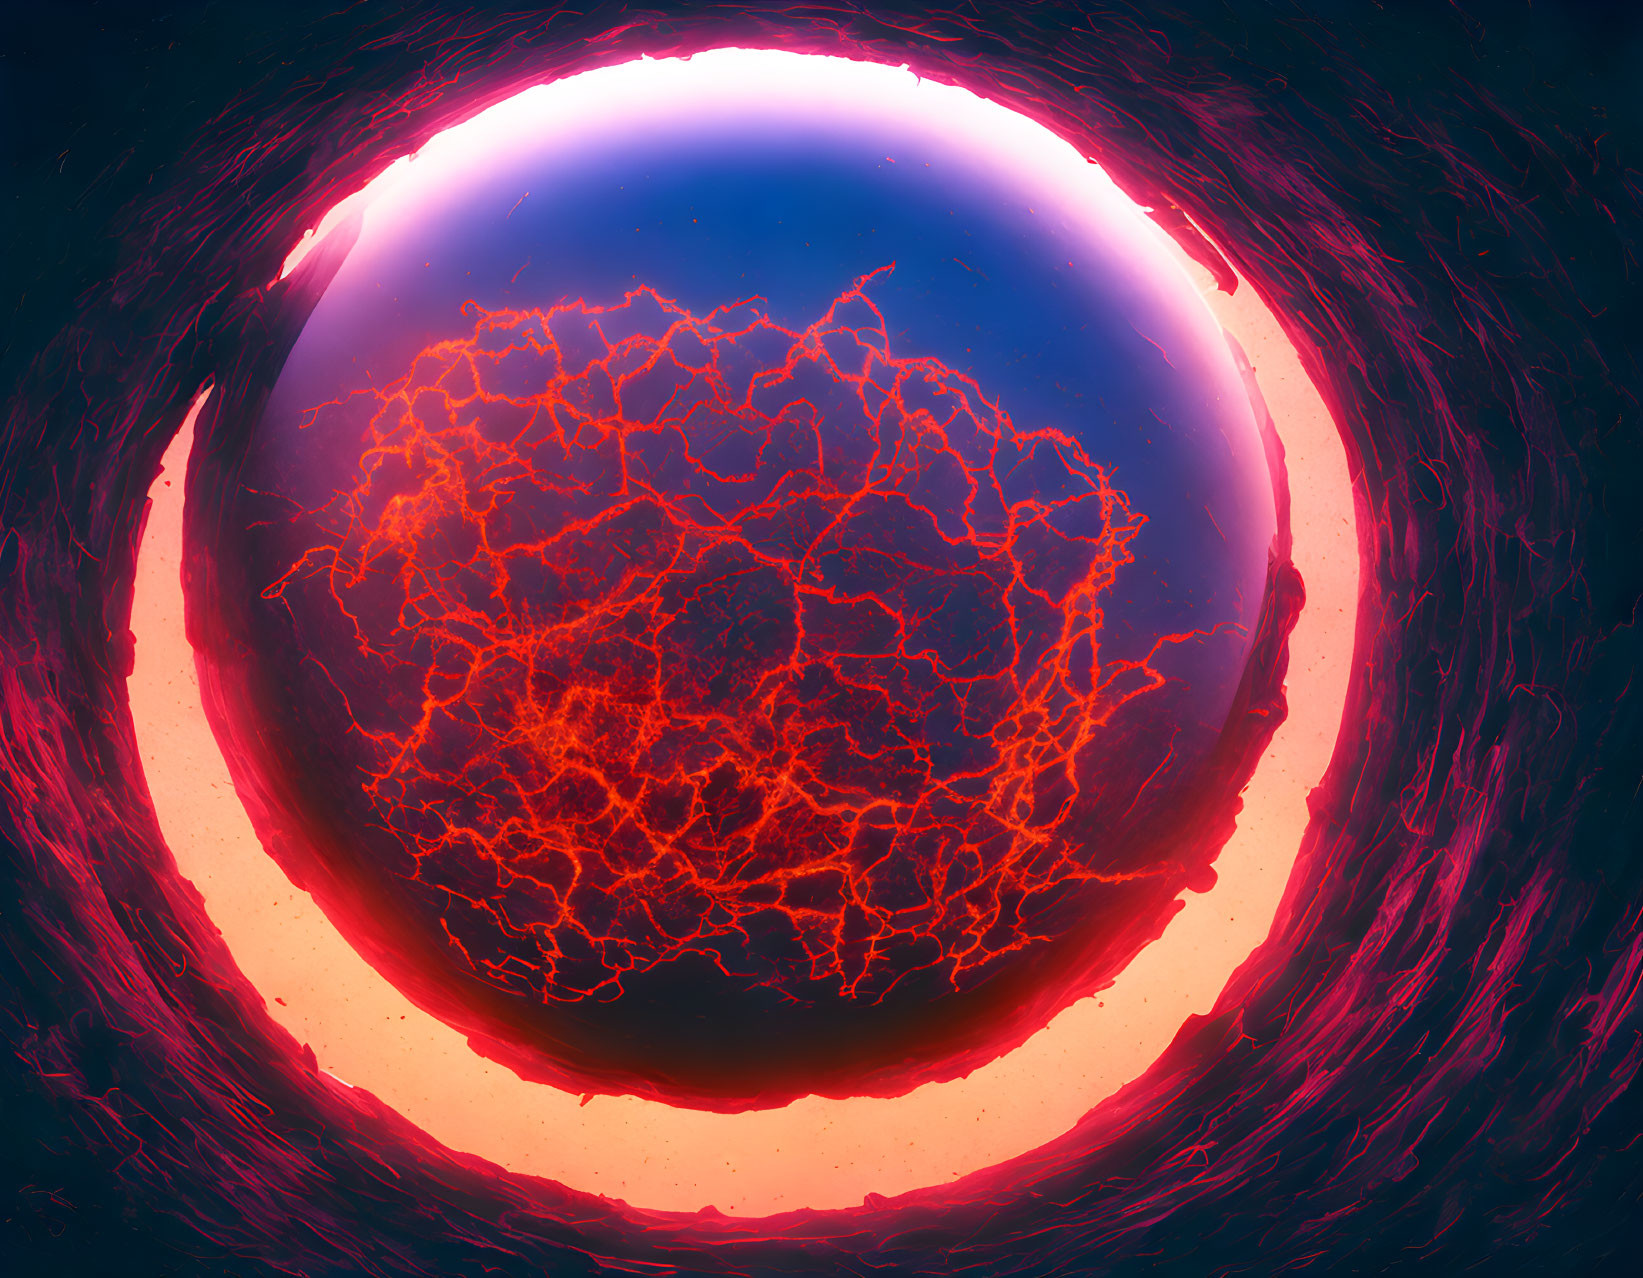 Colorful digital artwork: Glowing sphere with red and orange lightning patterns